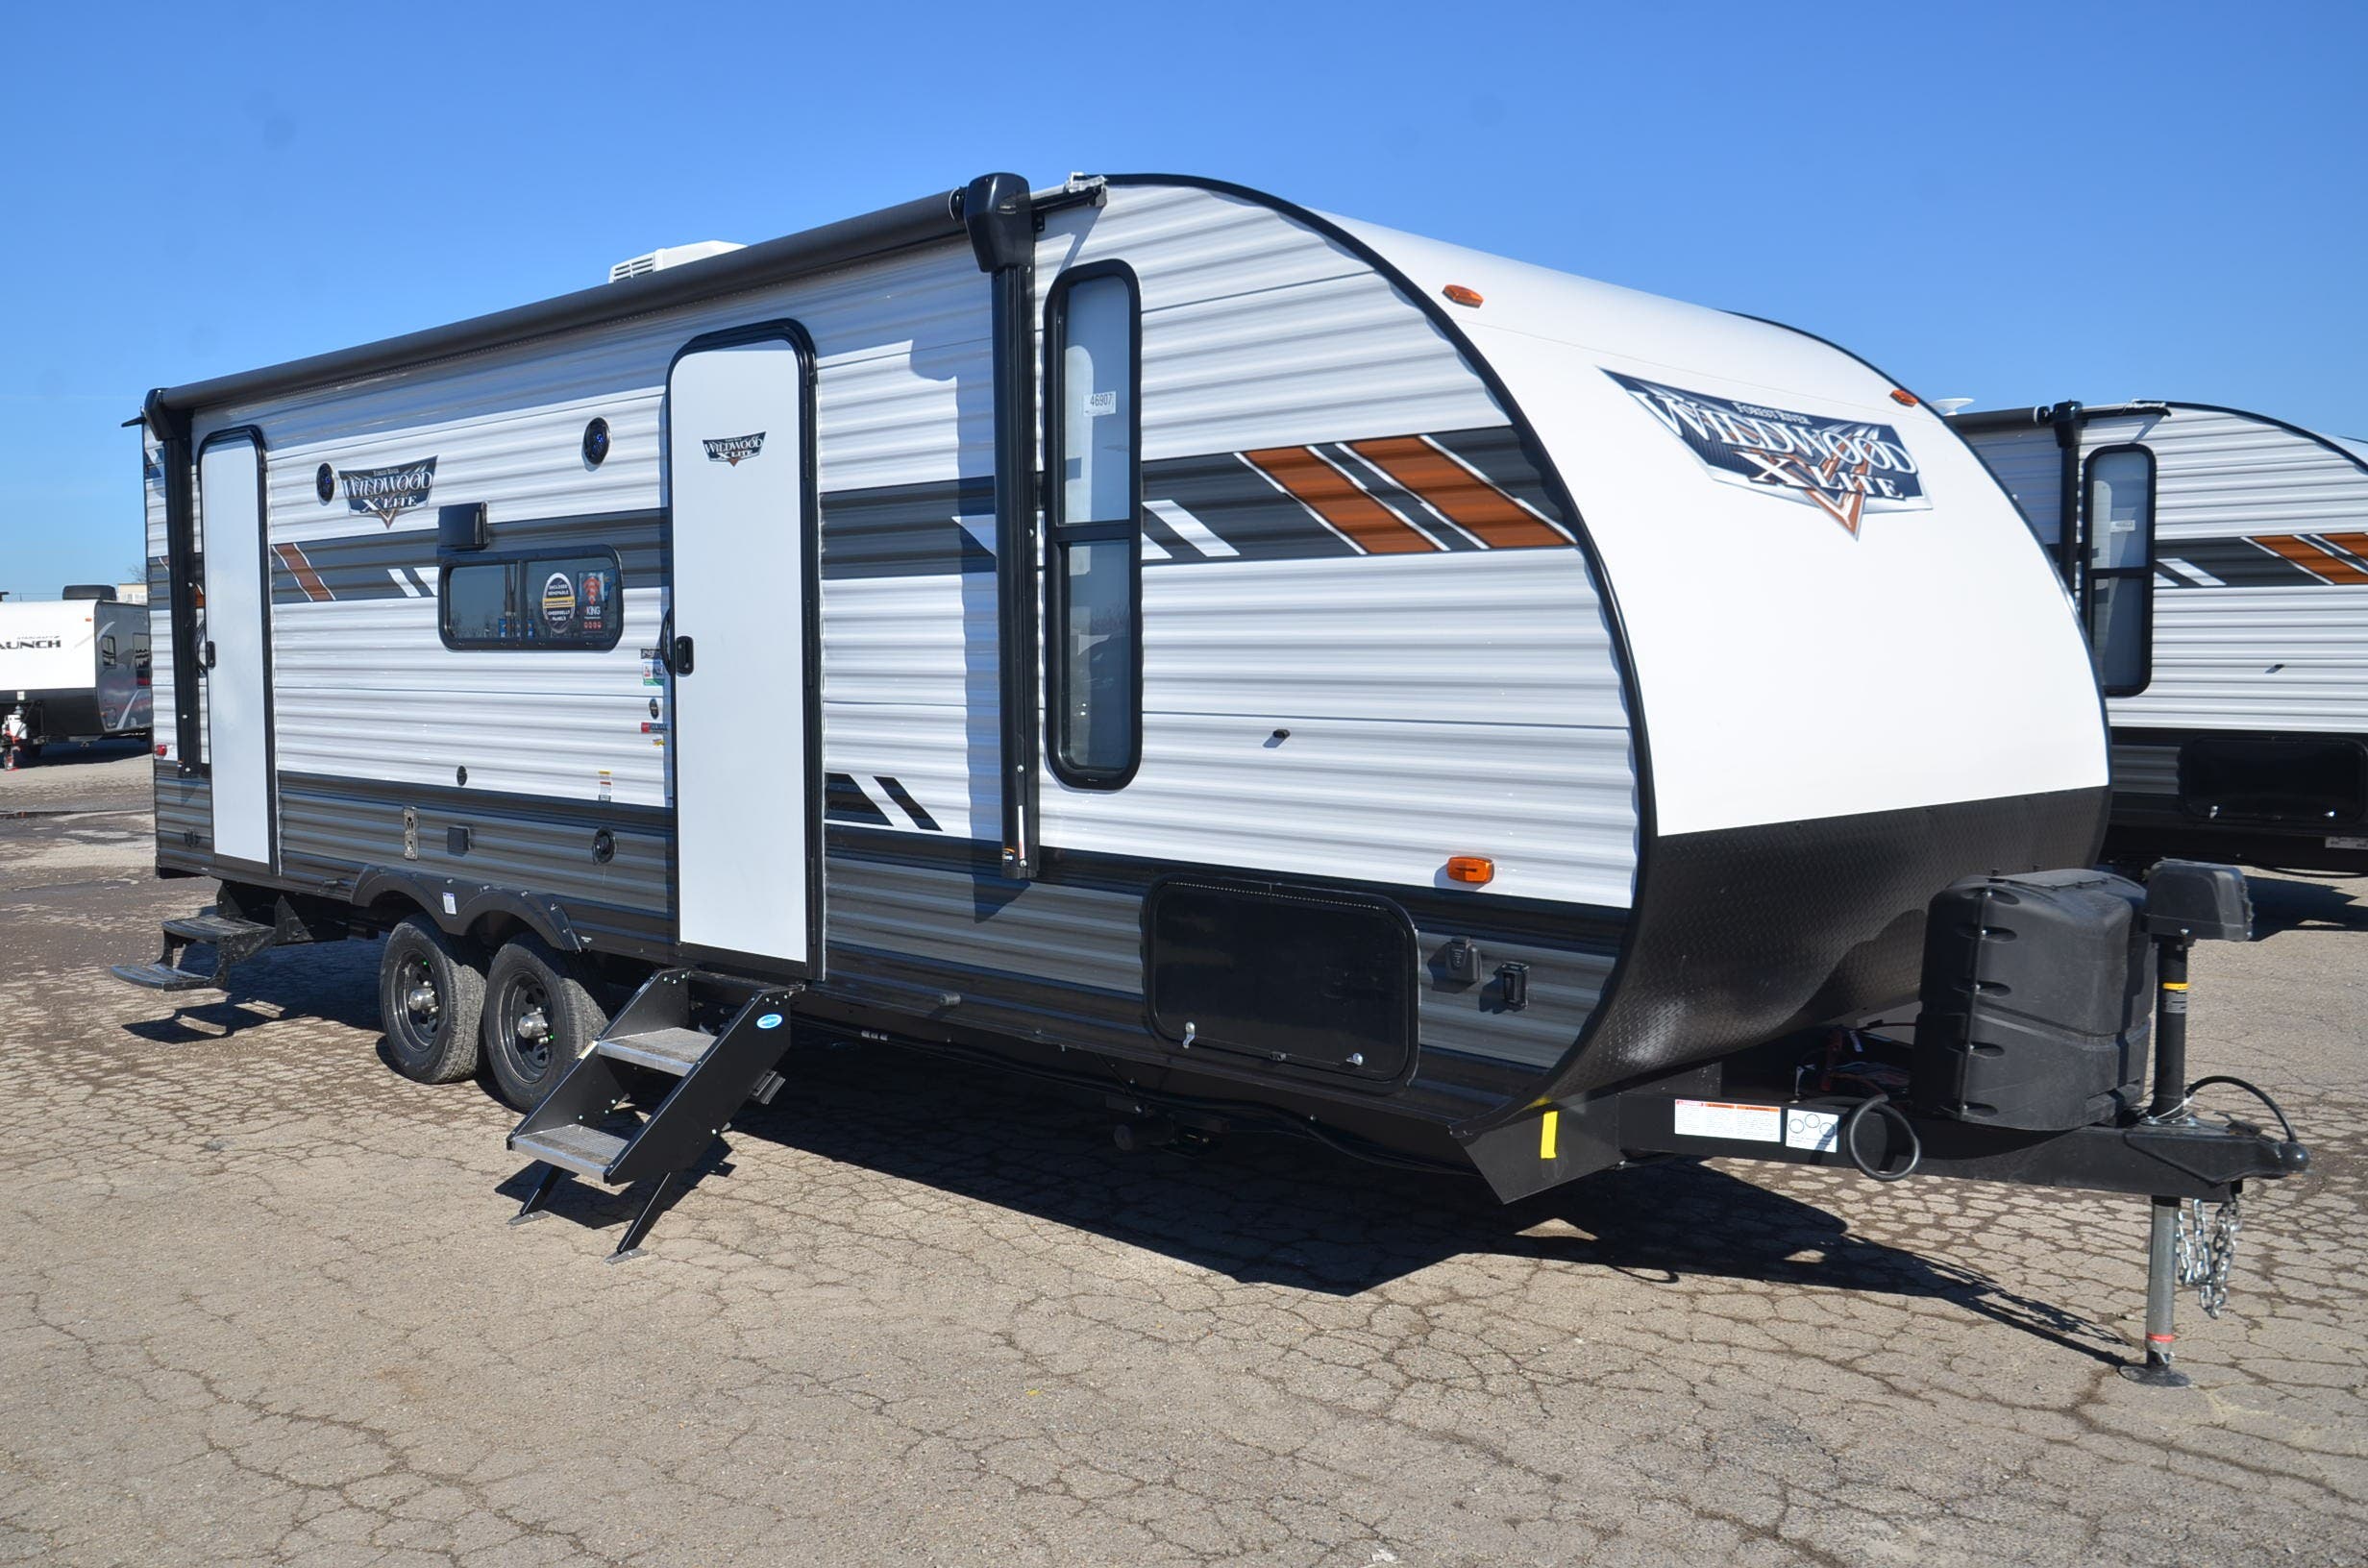 Wildwood X-Lite 240BHXL Travel Trailer - Cherry Capital RV Campers That Weigh Less Than 6000 Lbs